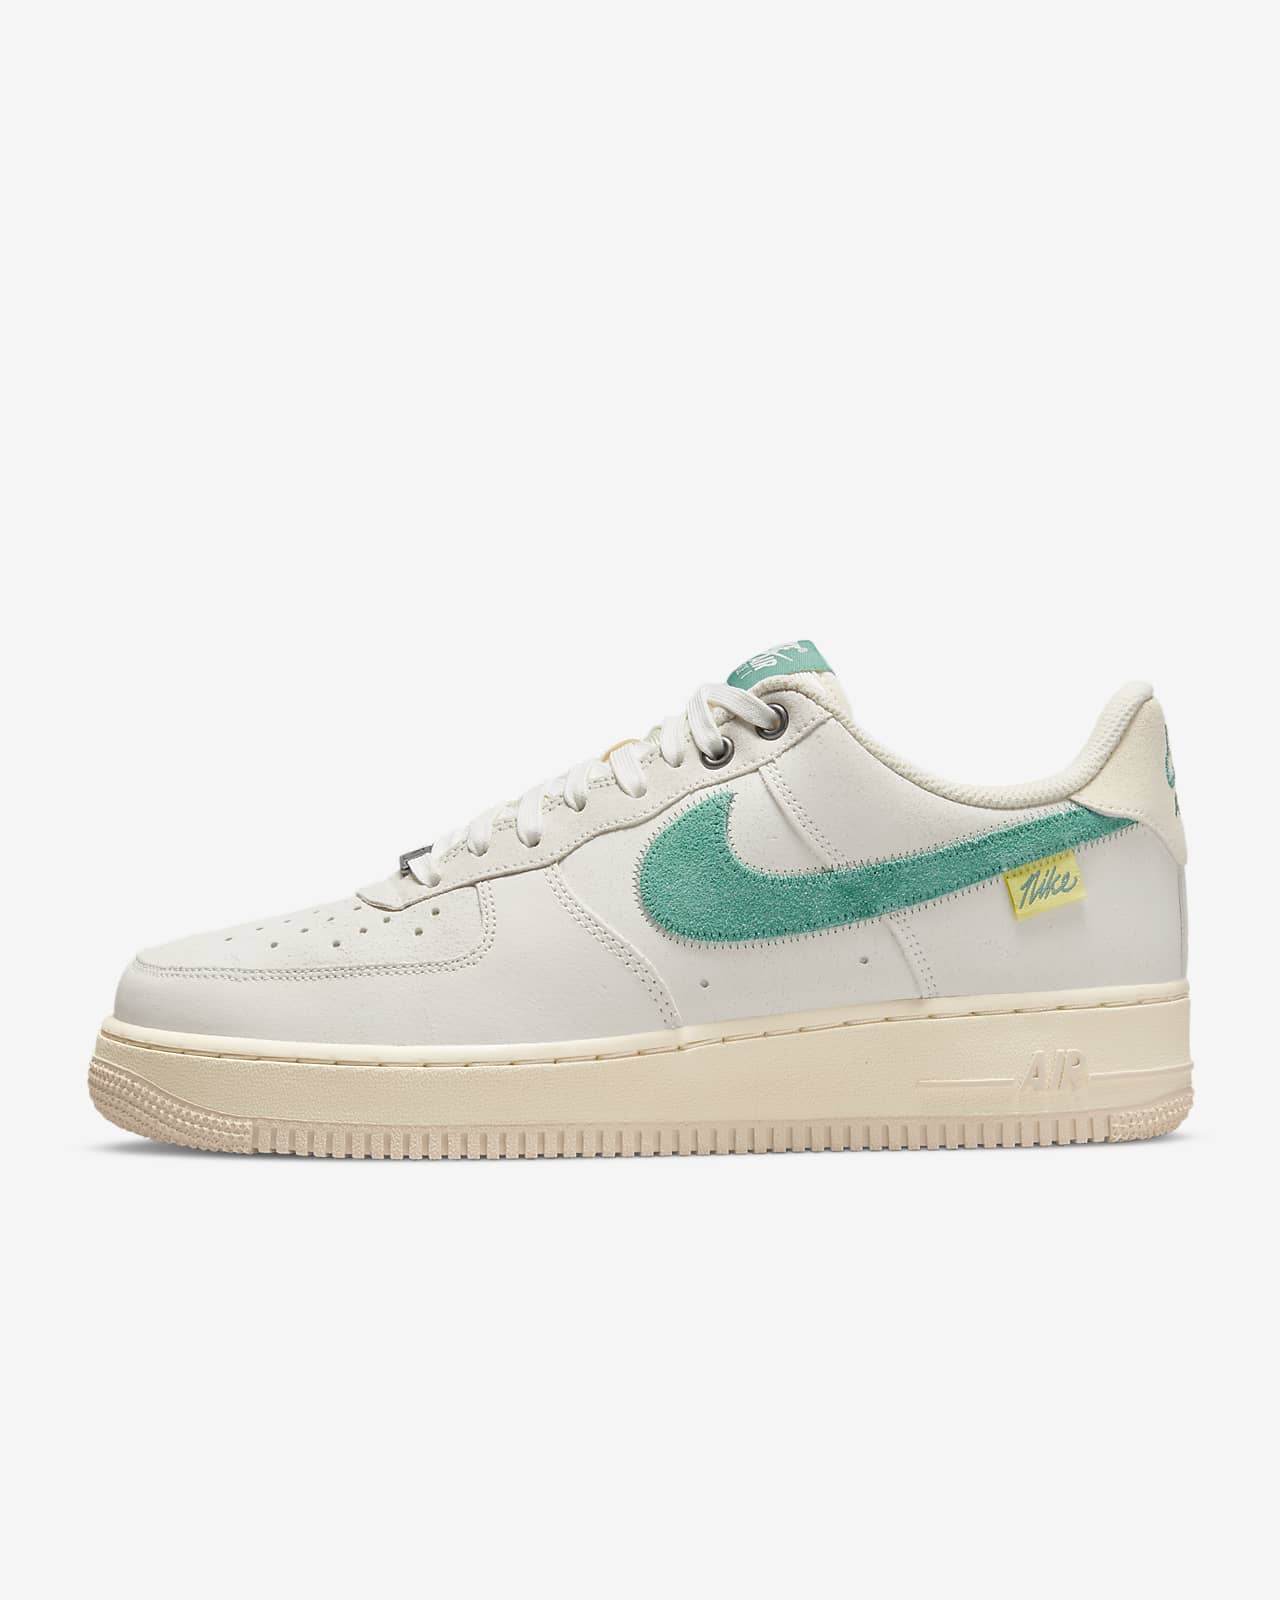 Nike Air Force 1 '07 LV8 'Green Noise' - Sneaker Steal